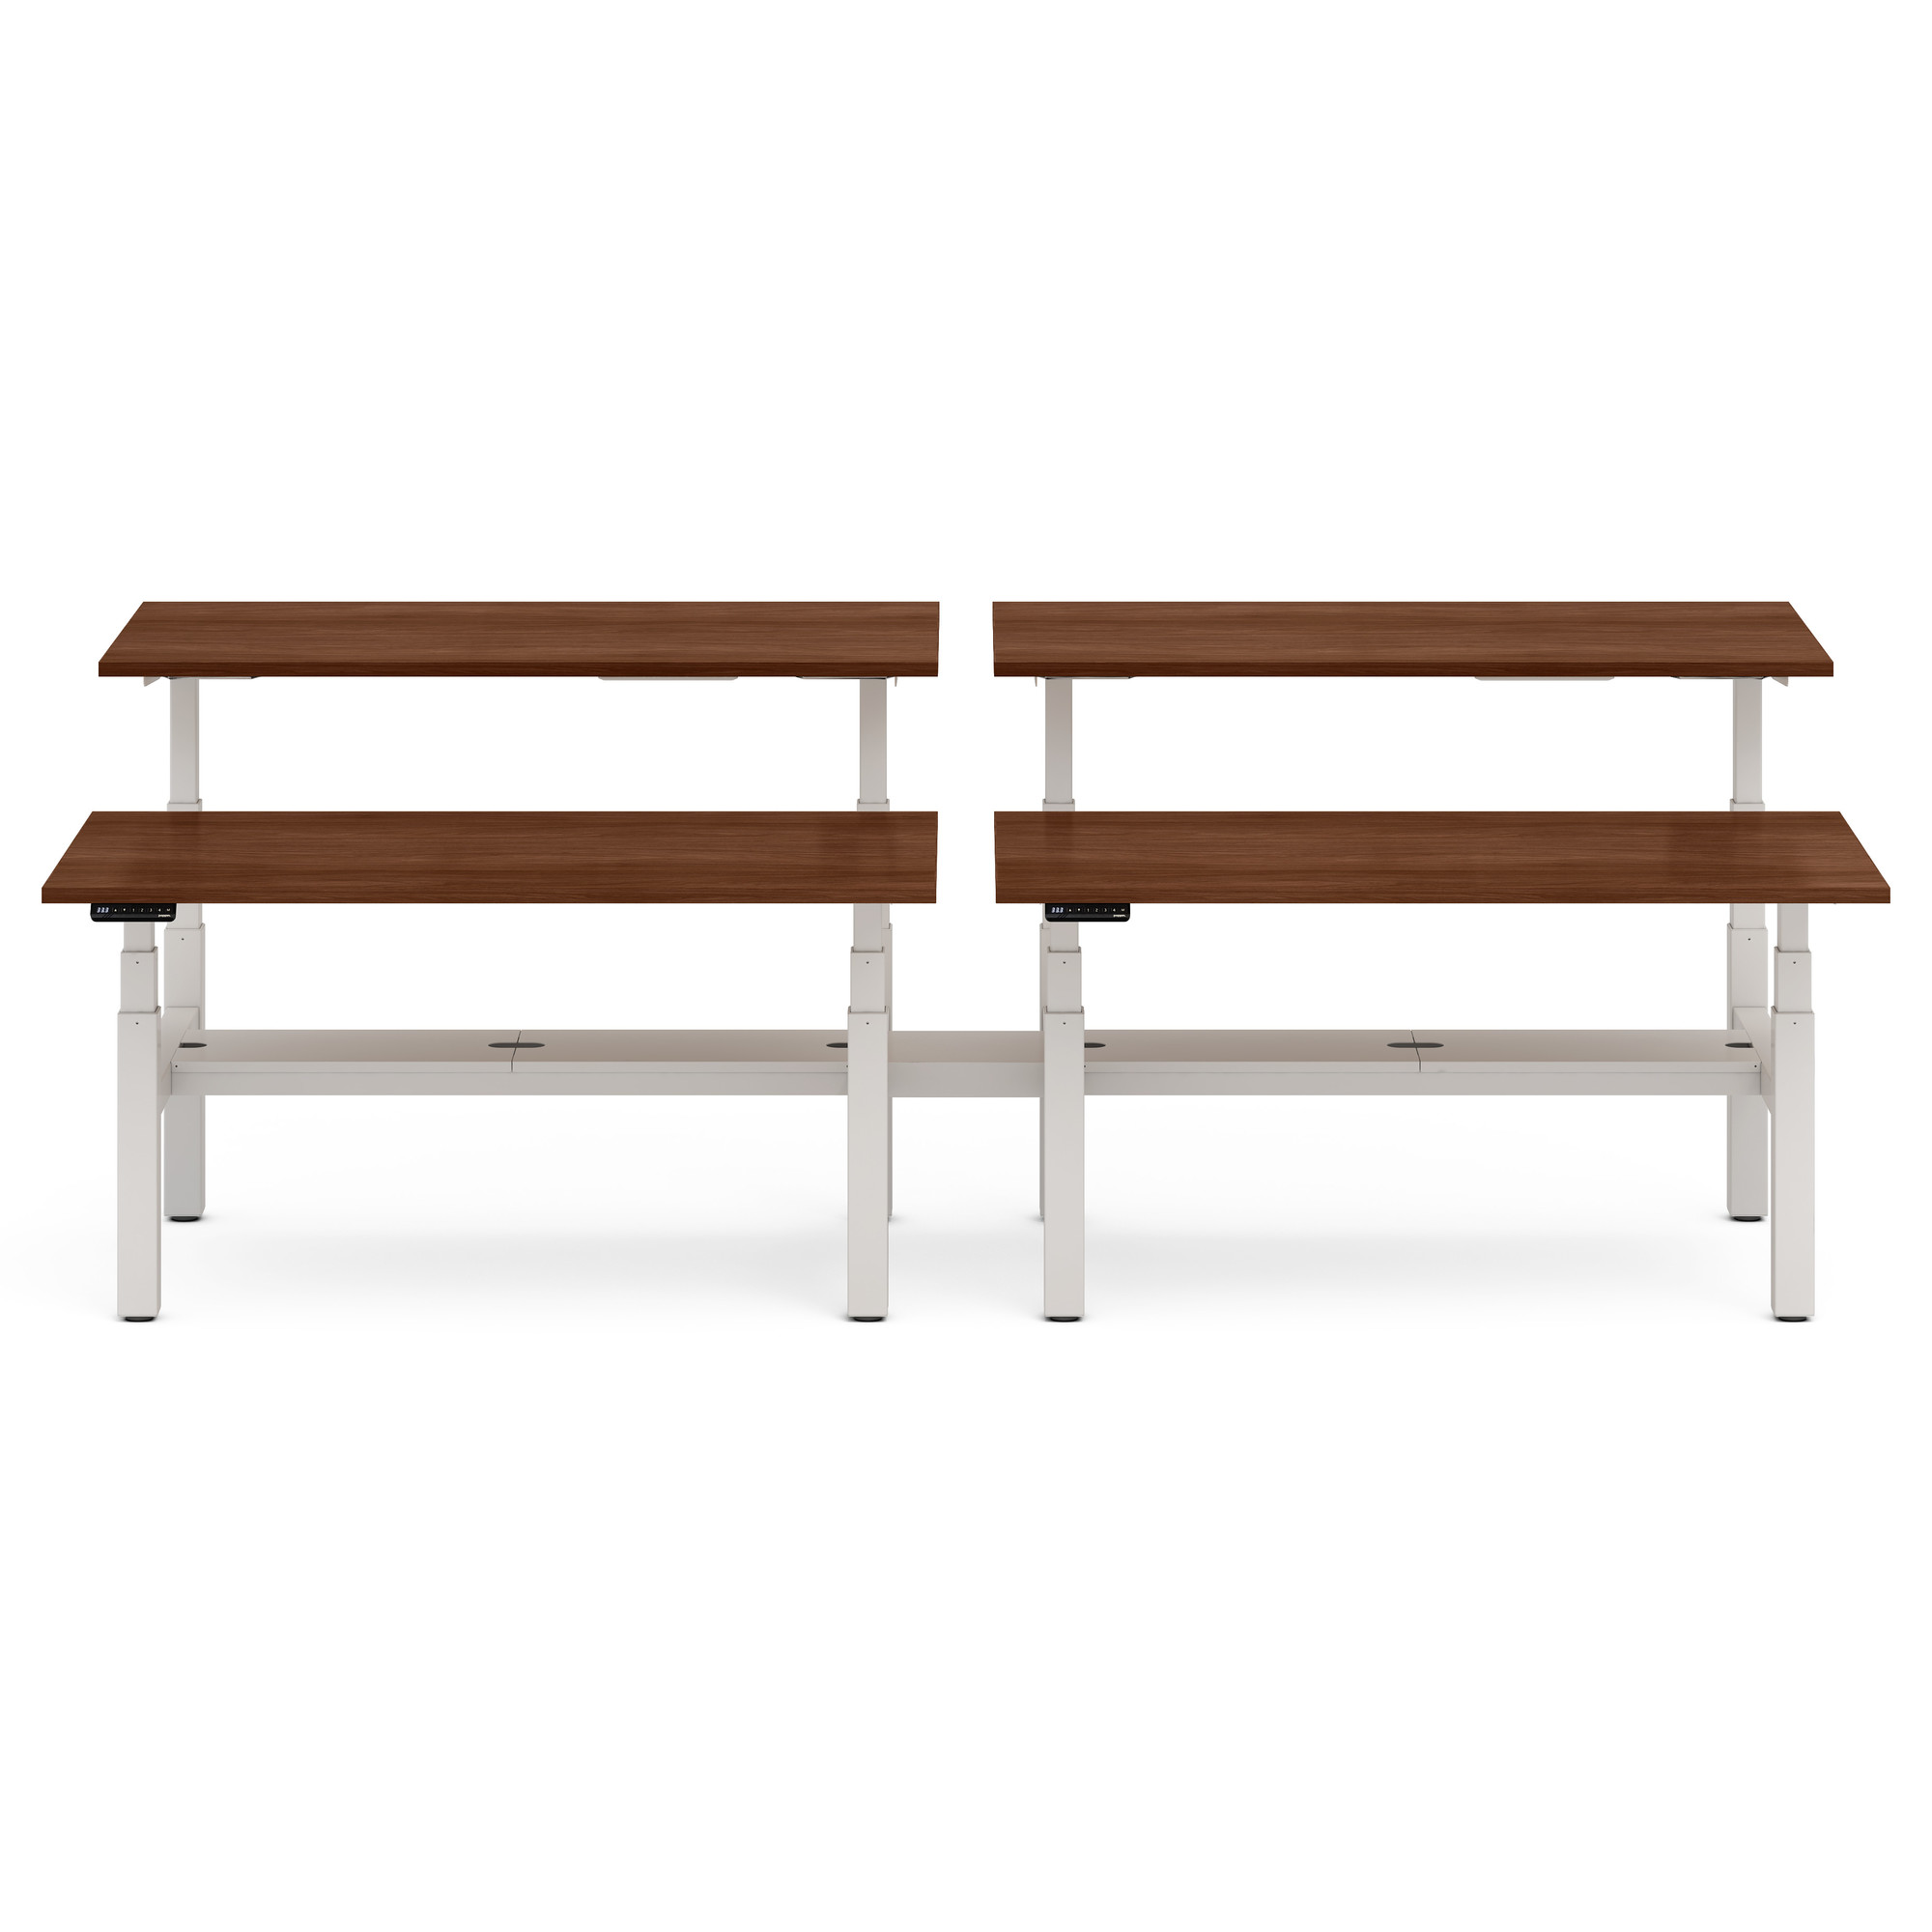 Series L Adjustable Height Double Desk for 4, Walnut, 60", White Legs,Walnut,hi-res